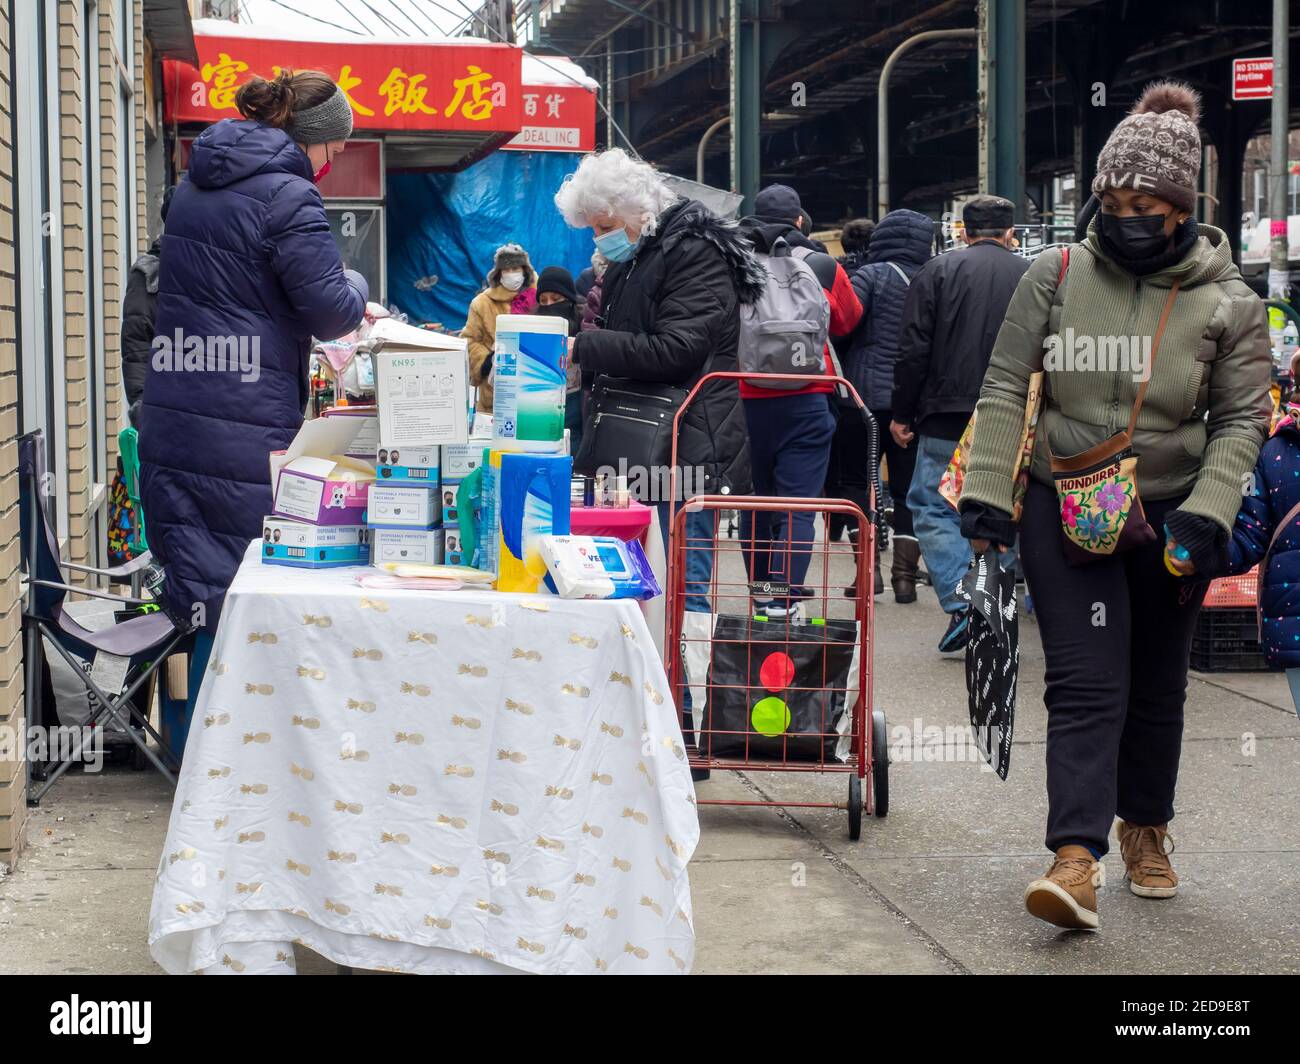 Brooklyn NY, USA - February 14, 2021: Street vendors, some of them illegal, overtaking streets of Bensonhurst trying to survive during pandemic time. Stock Photo